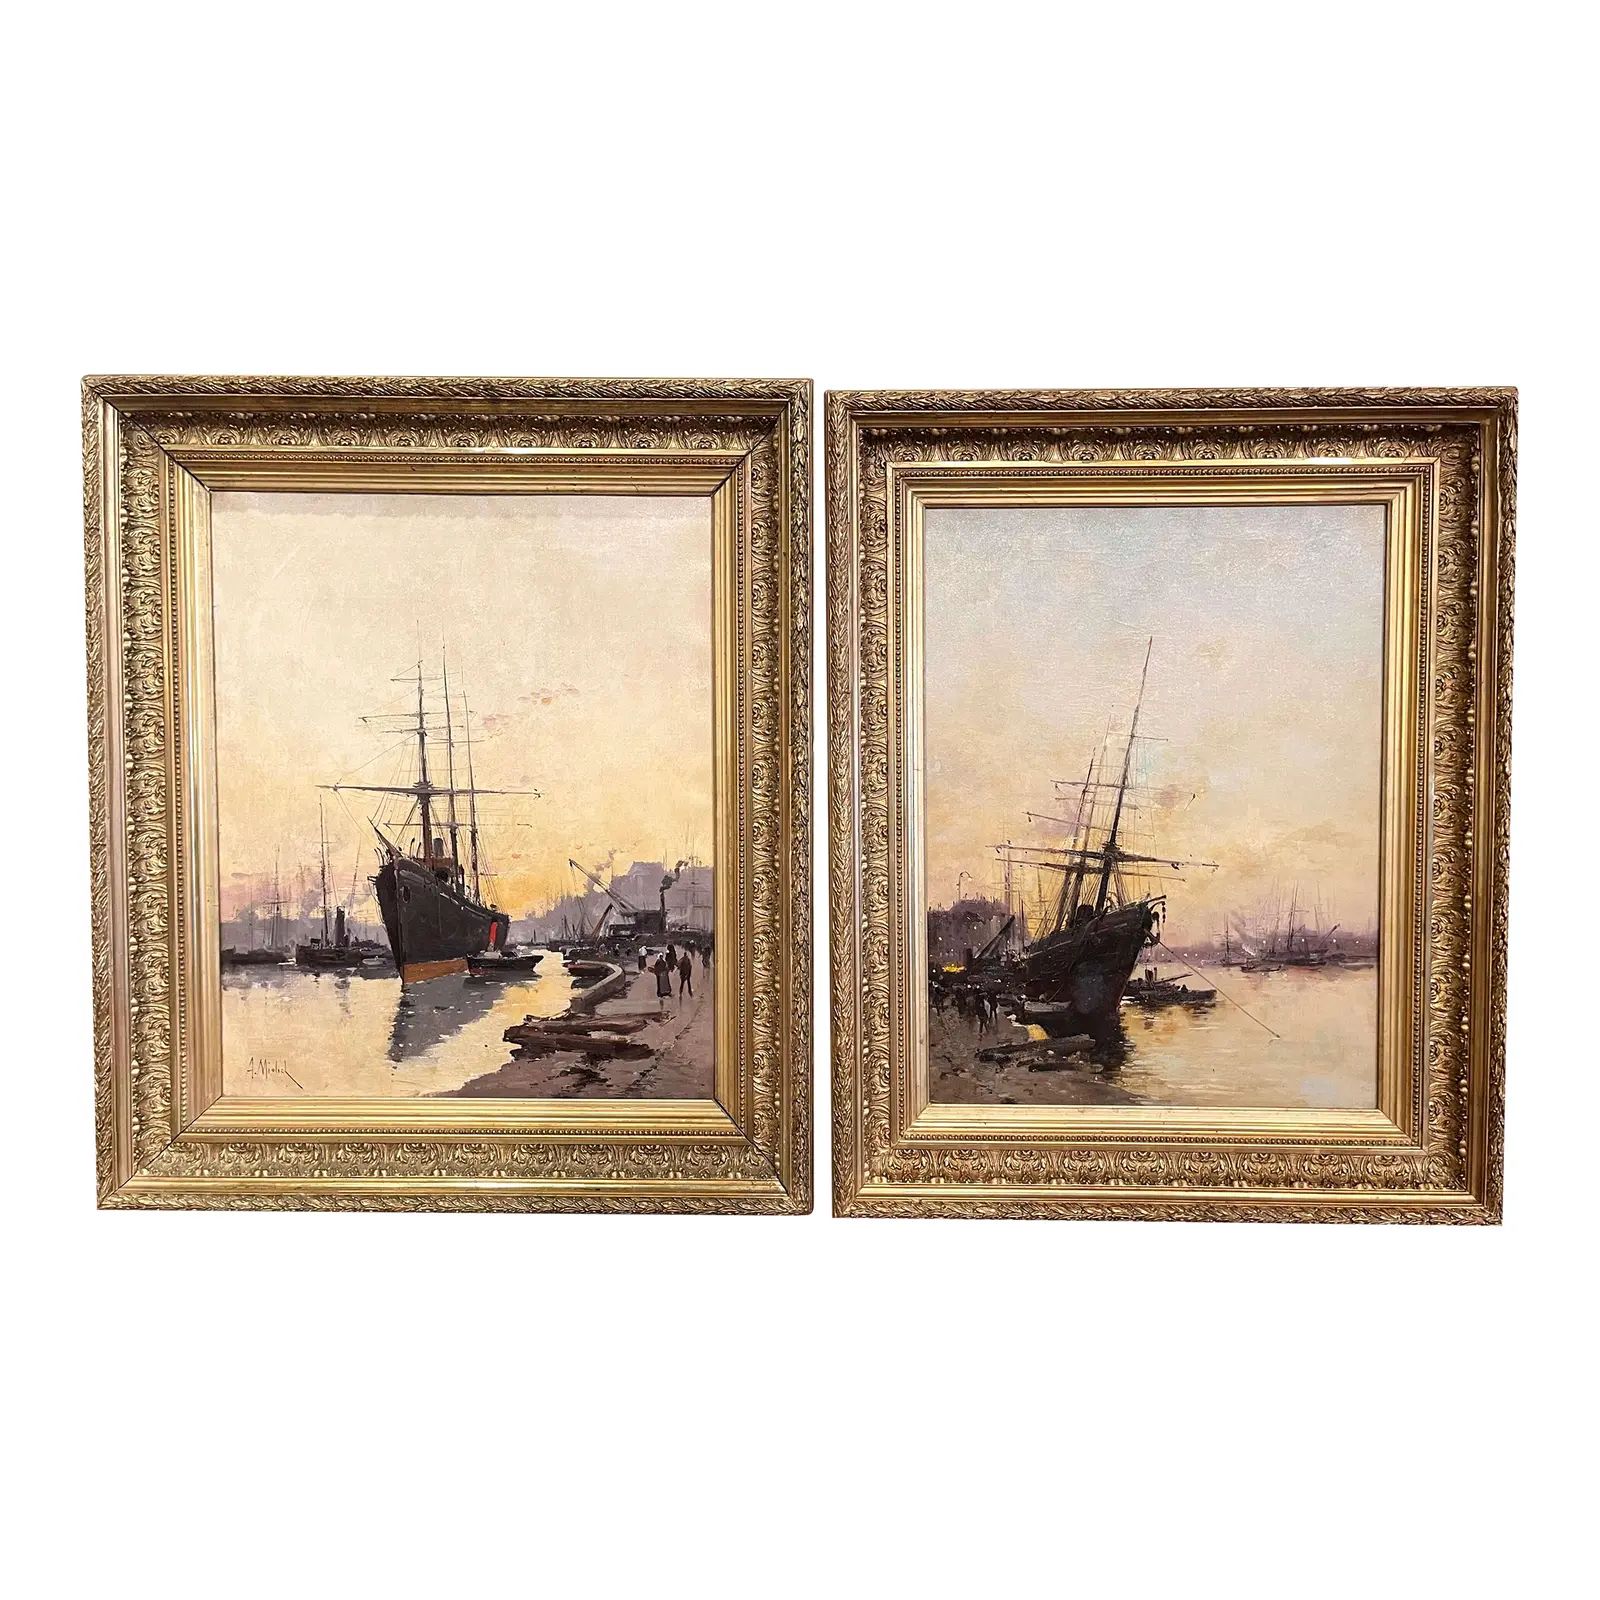 Pair of 19th Century Sailboat Oil Paintings Signed a Michel for E. Galien-Laloue | Chairish